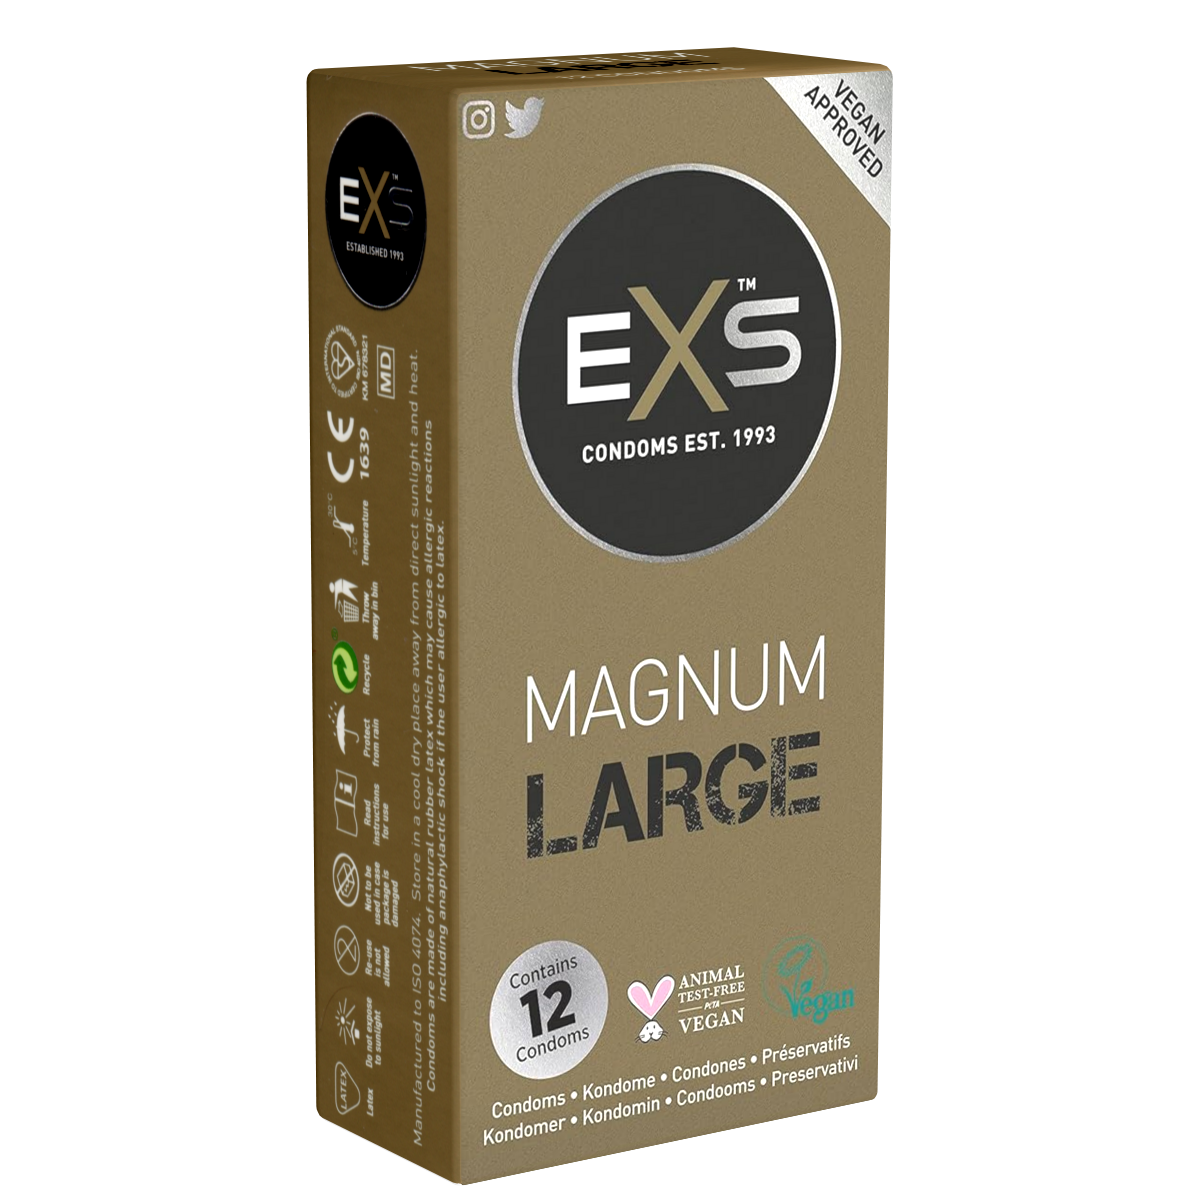 EXS «Magnum» Extra Large, 12 XXL condoms for even more space